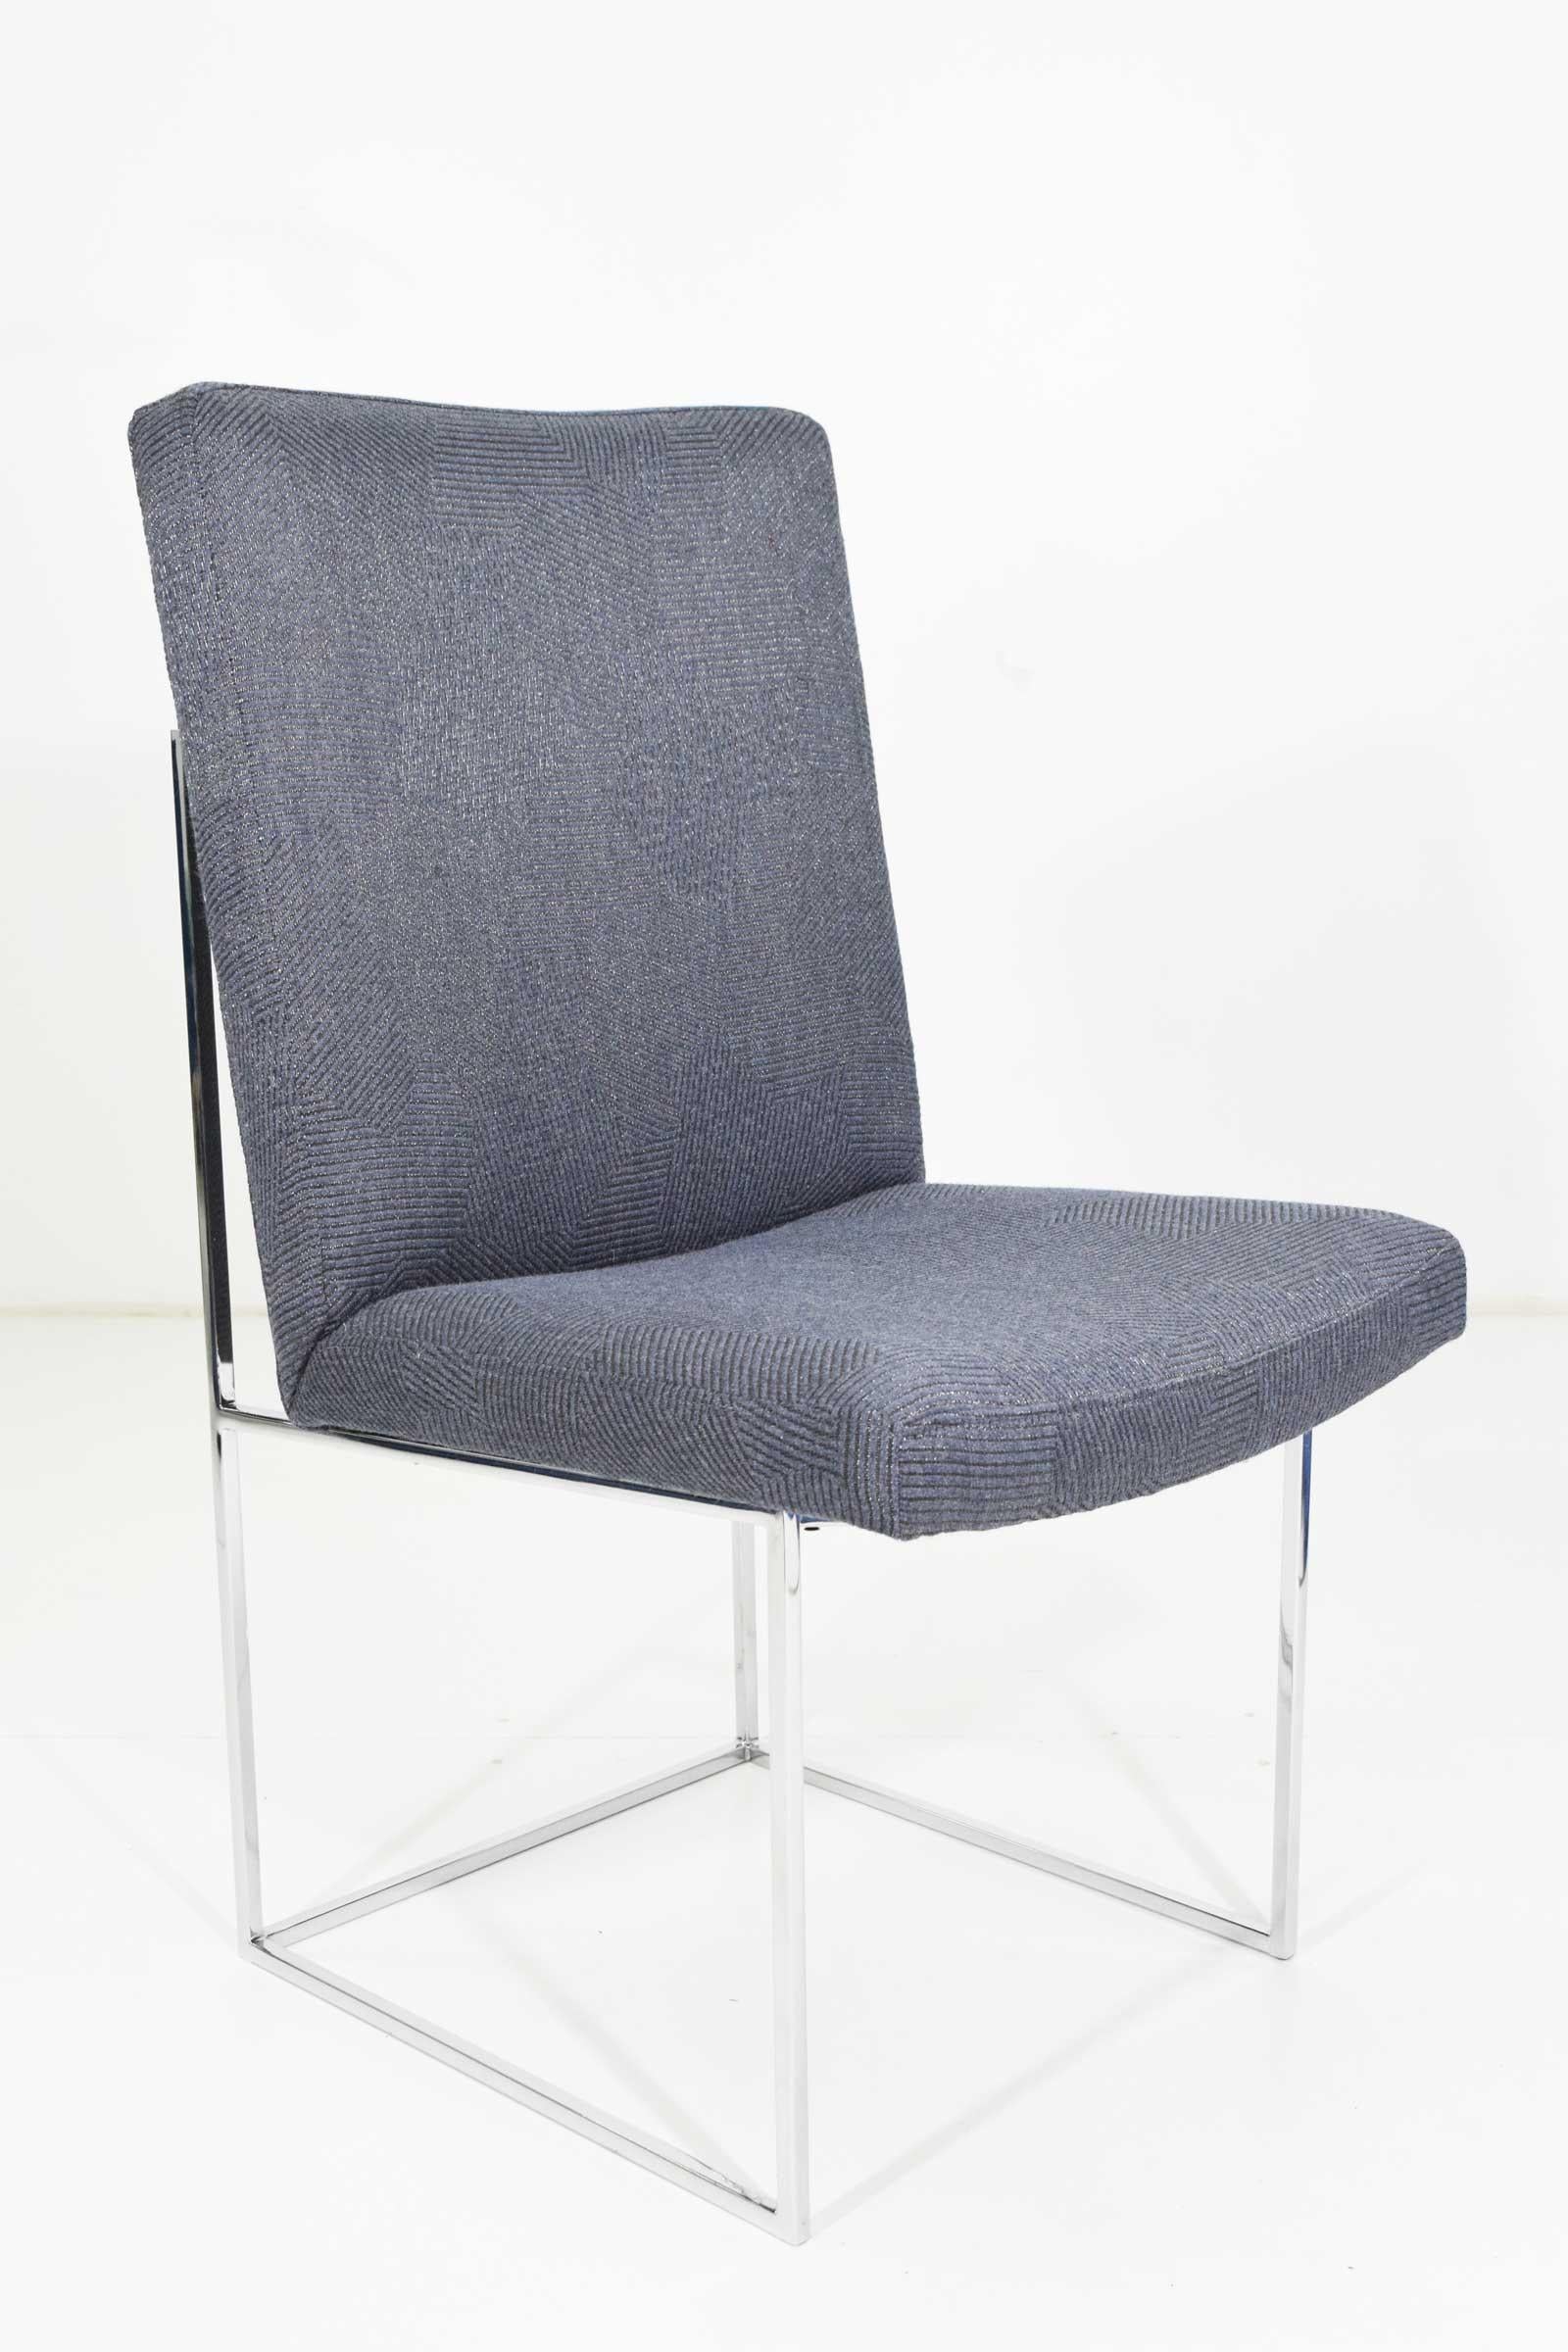 20th Century Milo Baughman Chrome Dining Chair in Holly Hunt Blue Alpaca, by Pairs up to 8 For Sale